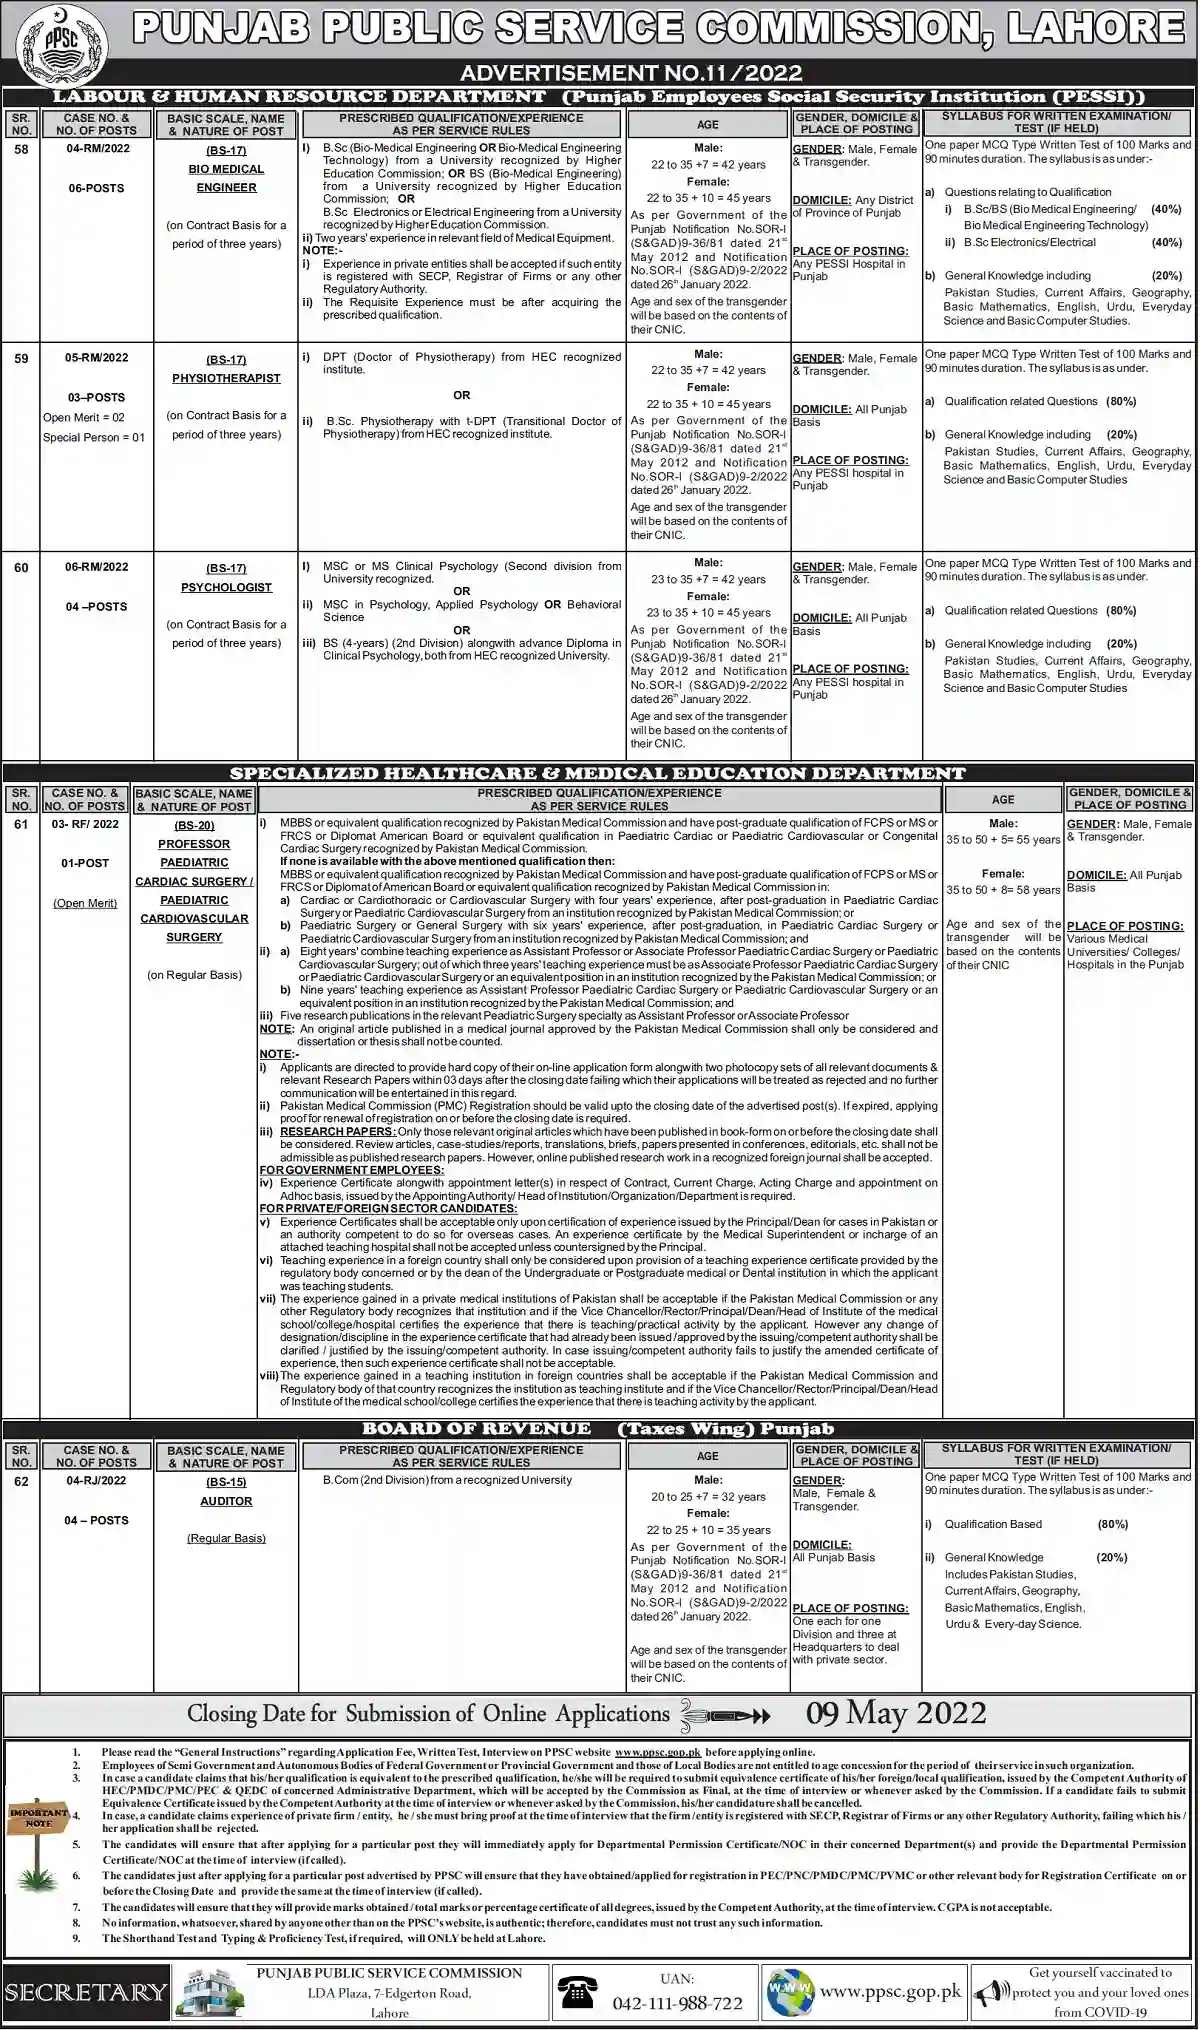 New PPSC Jobs Today Advertisement No 11 2022 Latest